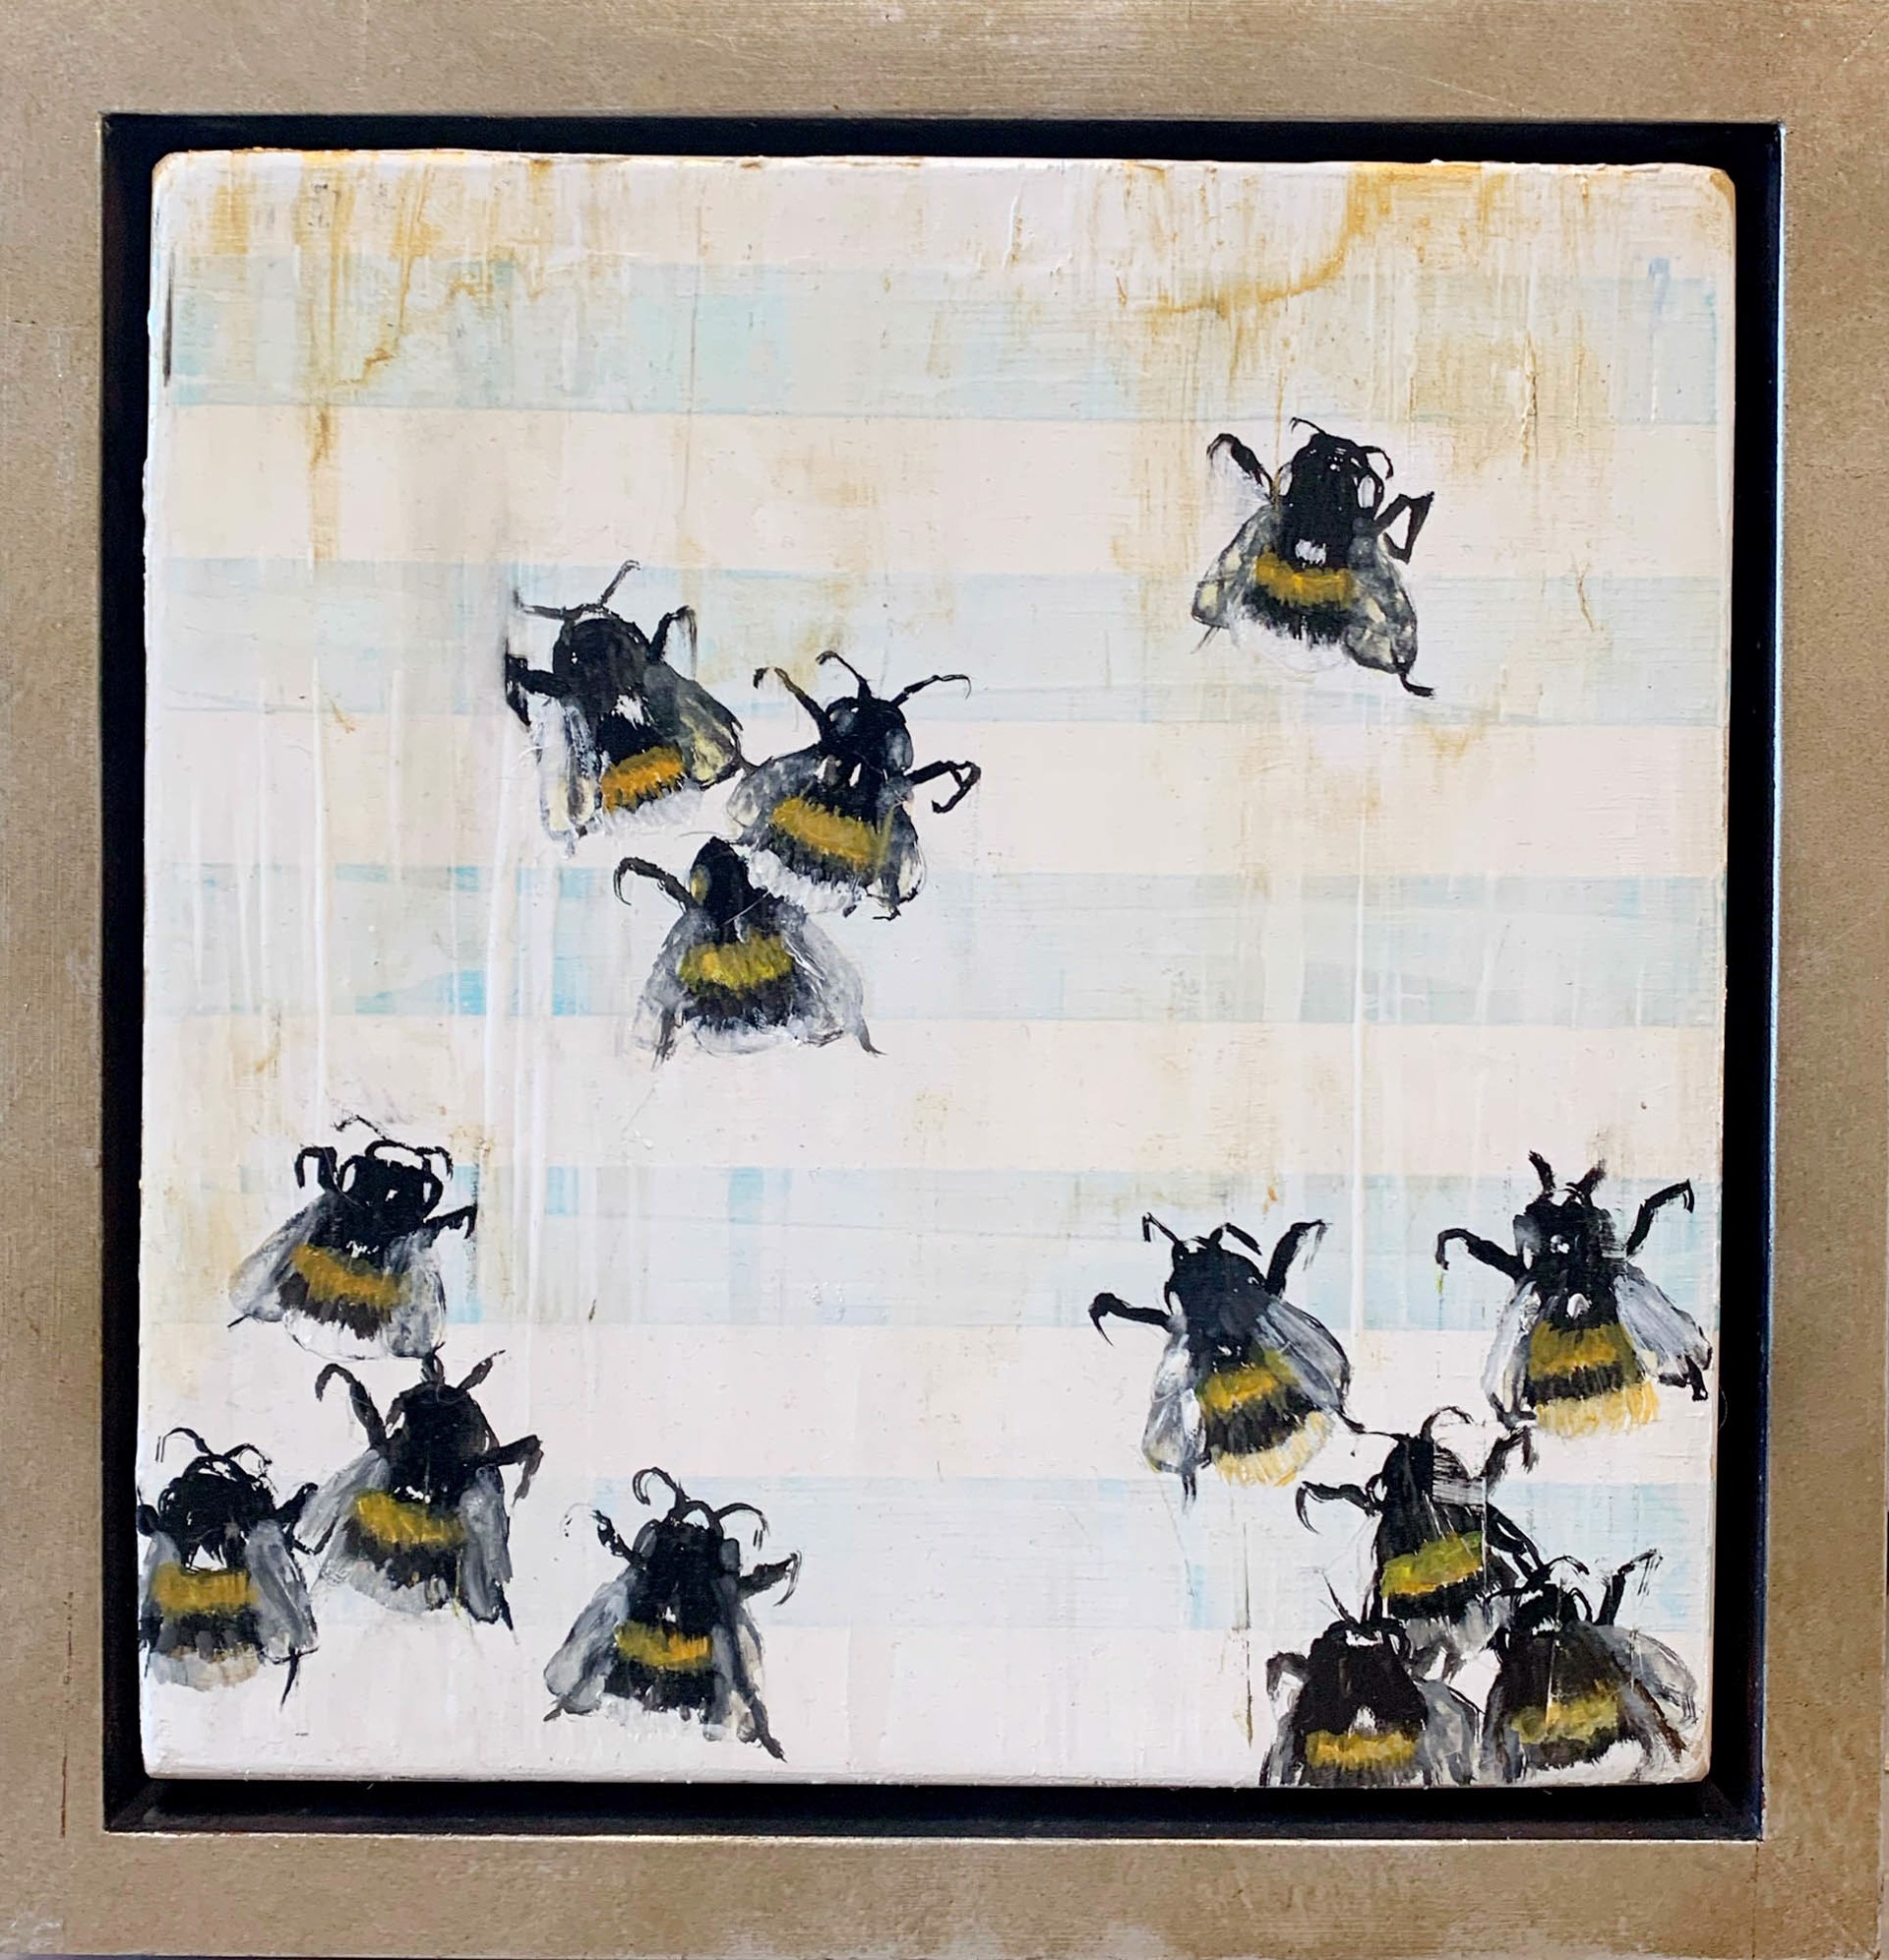 Oil Painting Of Bumble Bees On A Contemporary Background Featuring Light Blue And White Stripes, By Jenna Von Benedikt